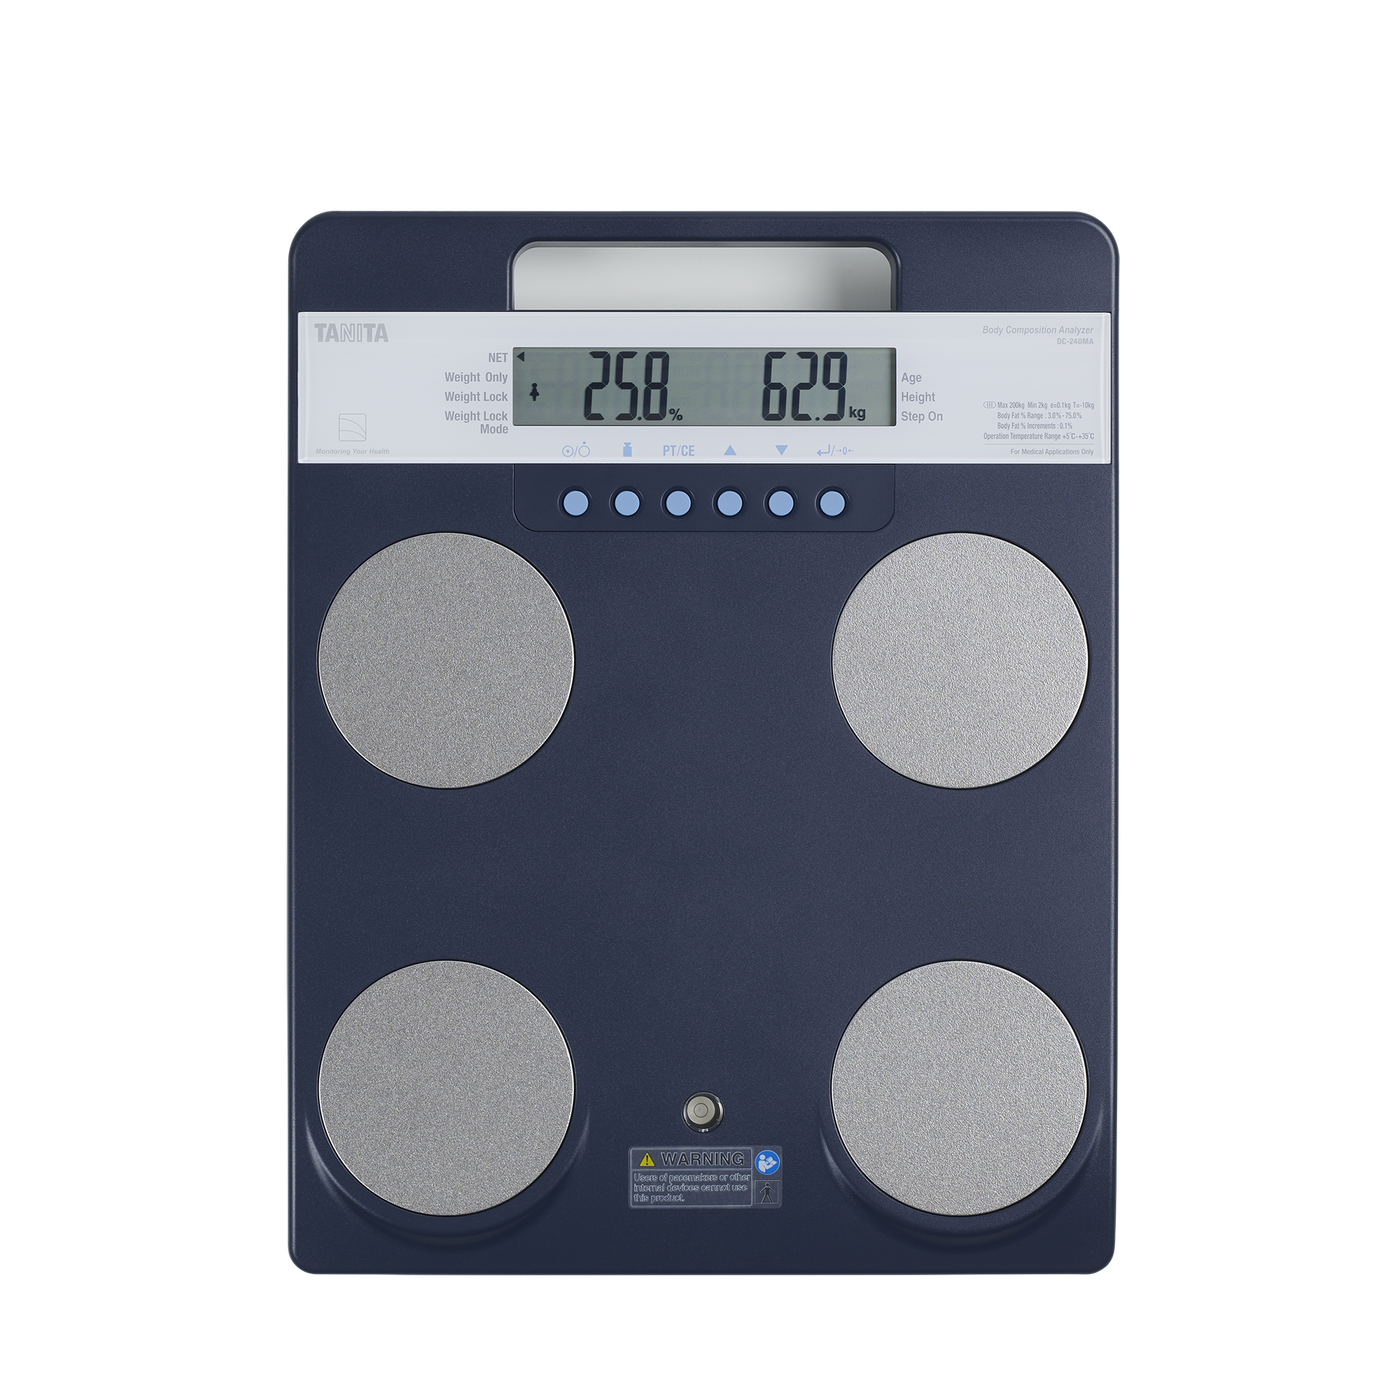 DC-240 Body Composition Monitor